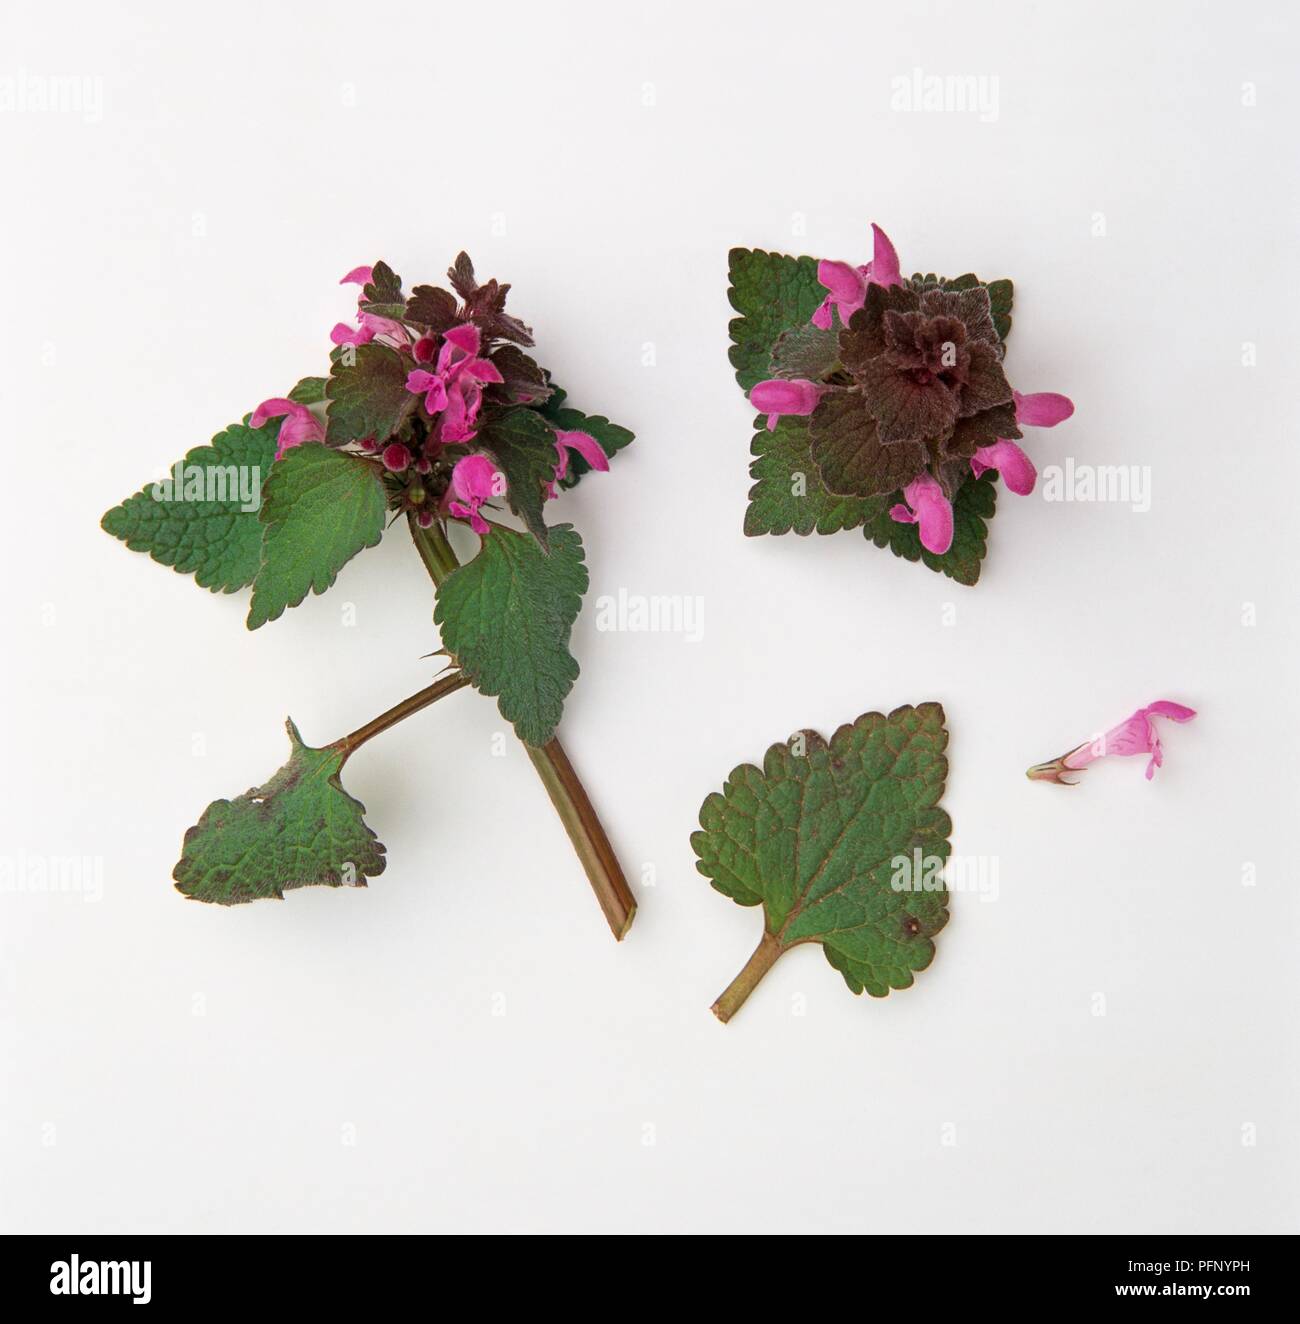 Lamium purpureum (Red dead-nettle), leaves and pink flowers Stock Photo